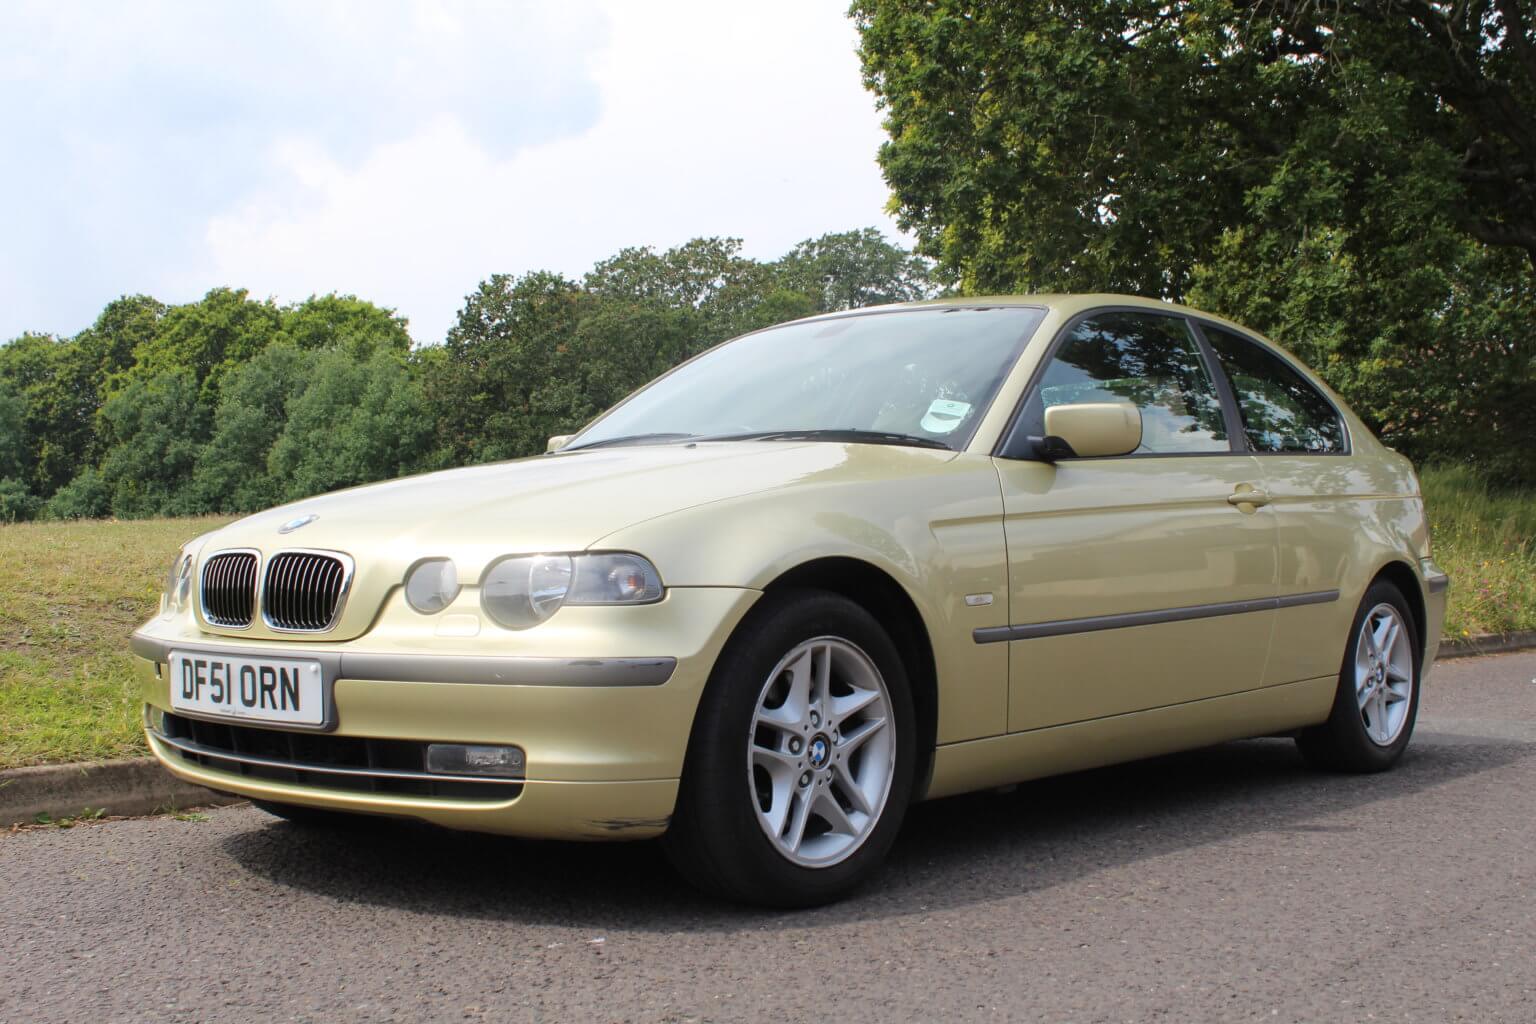 BMW 325 Ti Compact 2002 South Western Vehicle Auctions Ltd